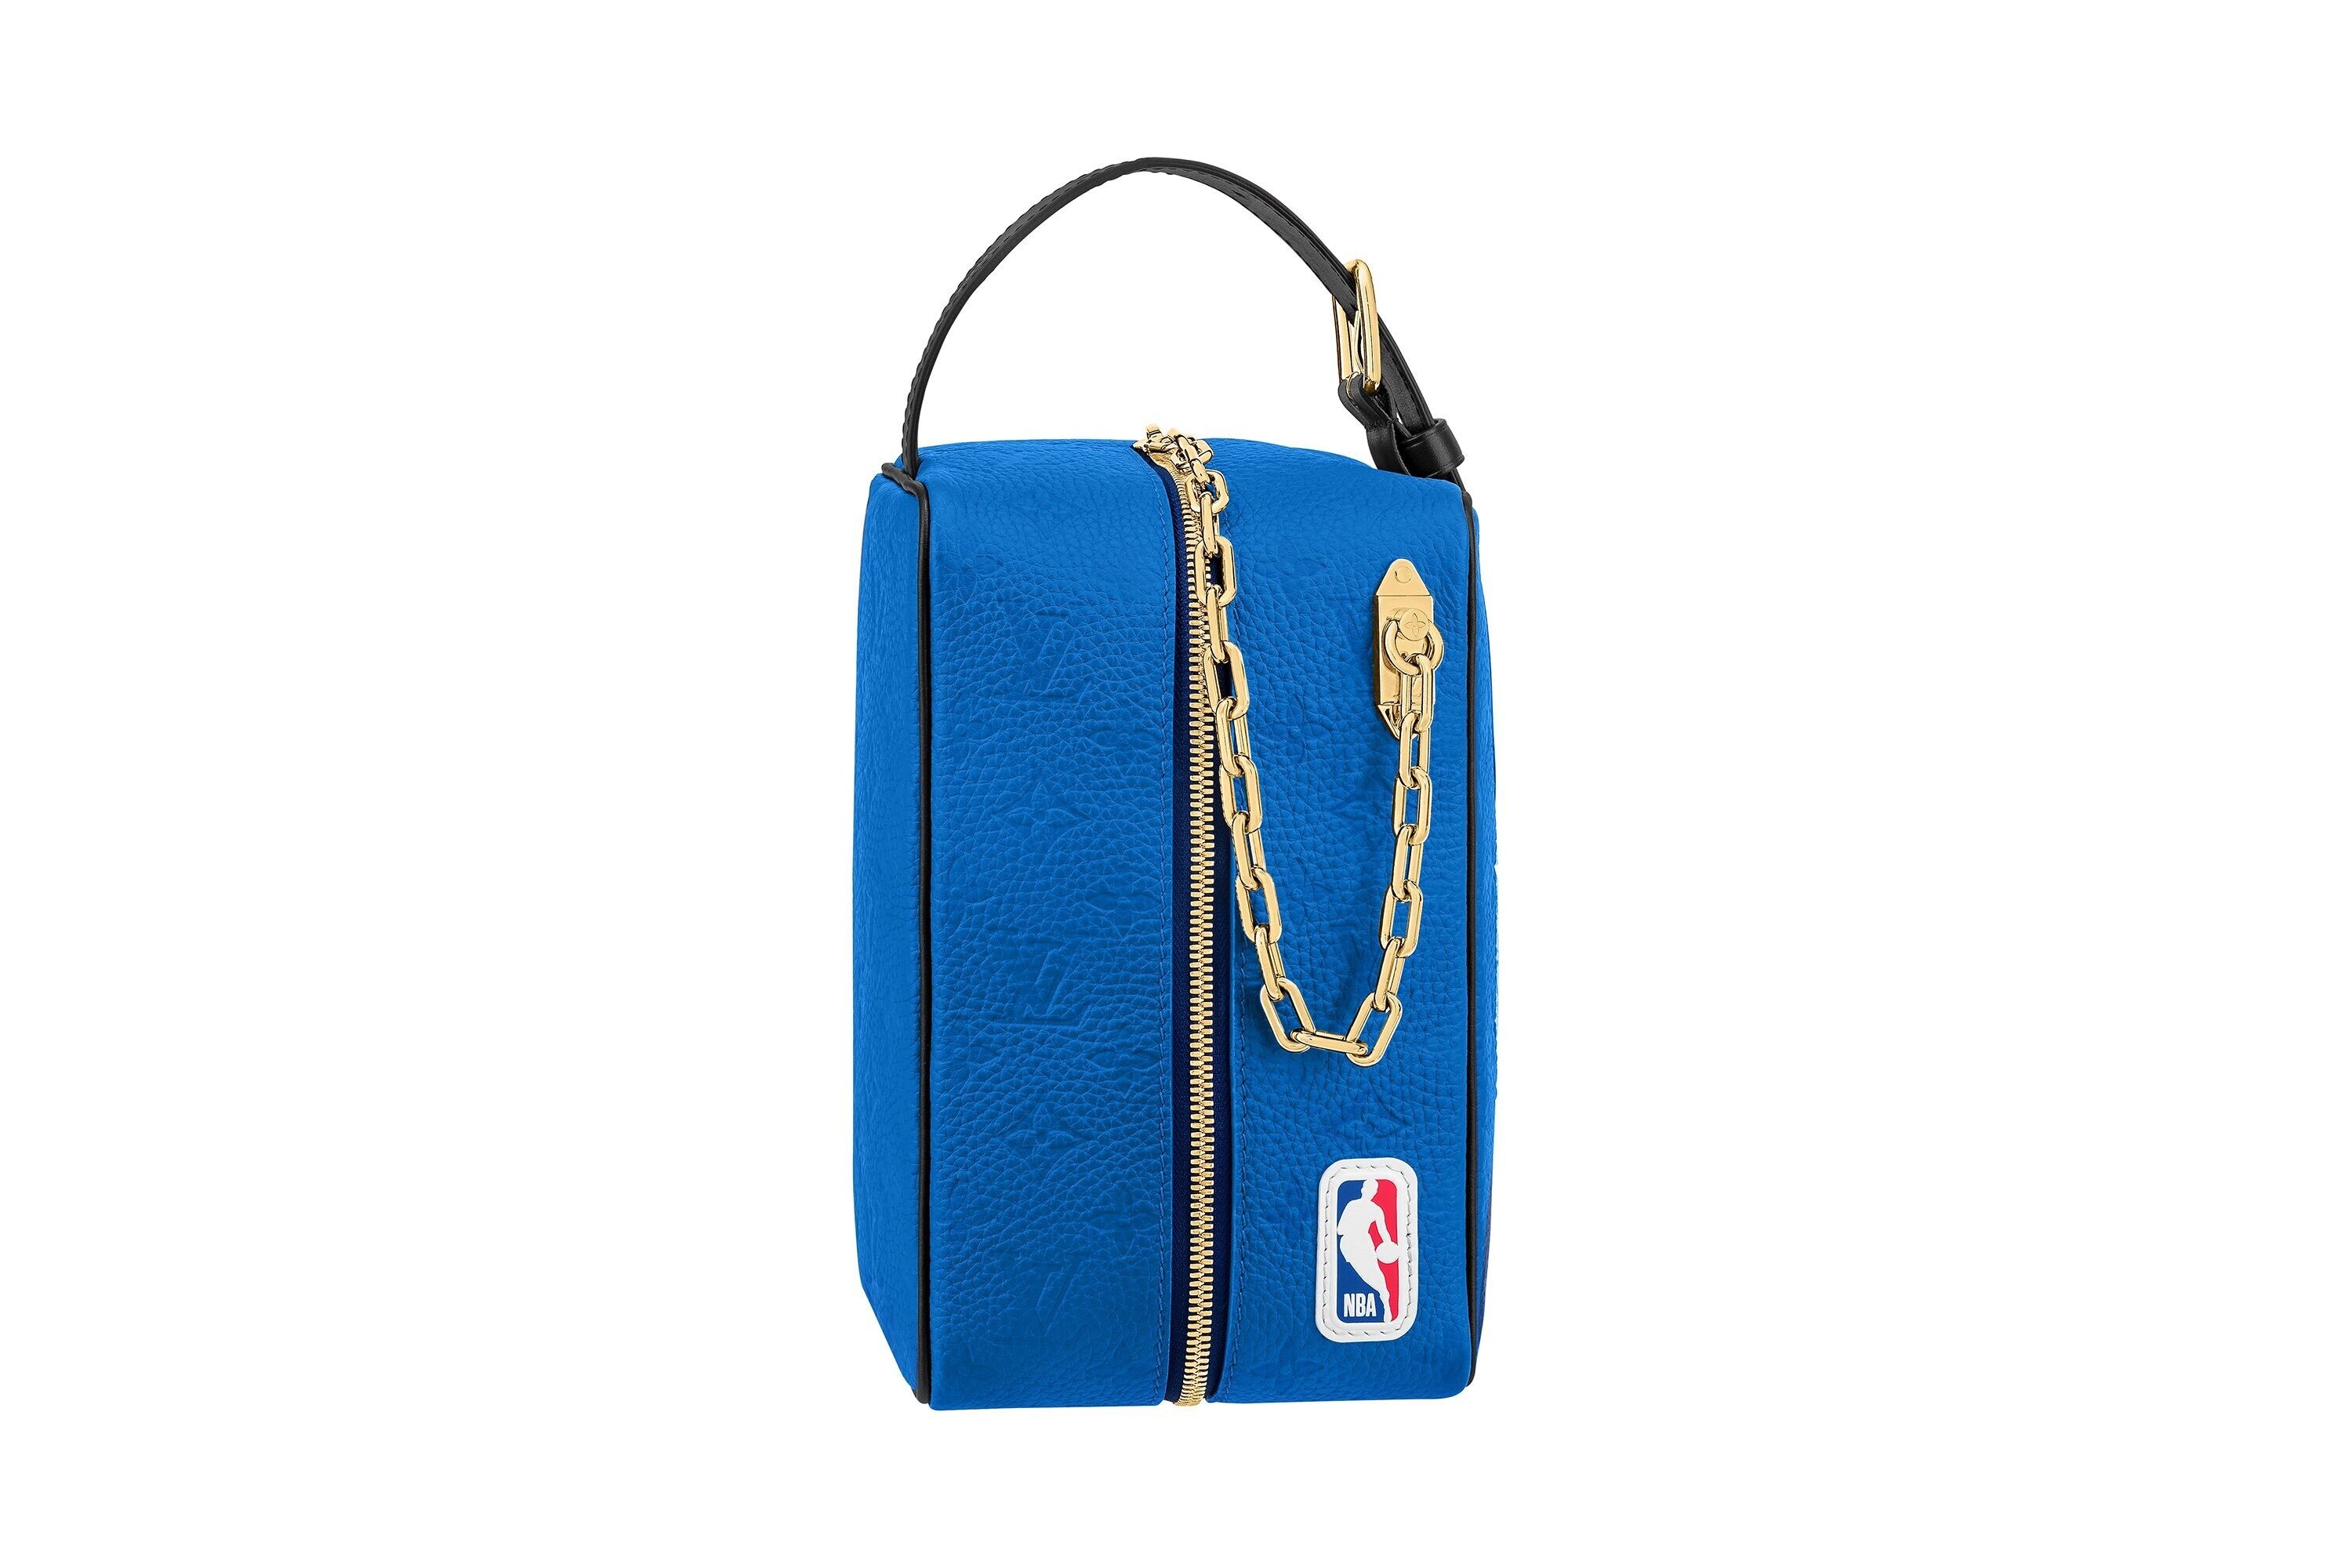 Louis Vuitton NBA チャールストン クリア ルイヴィトン